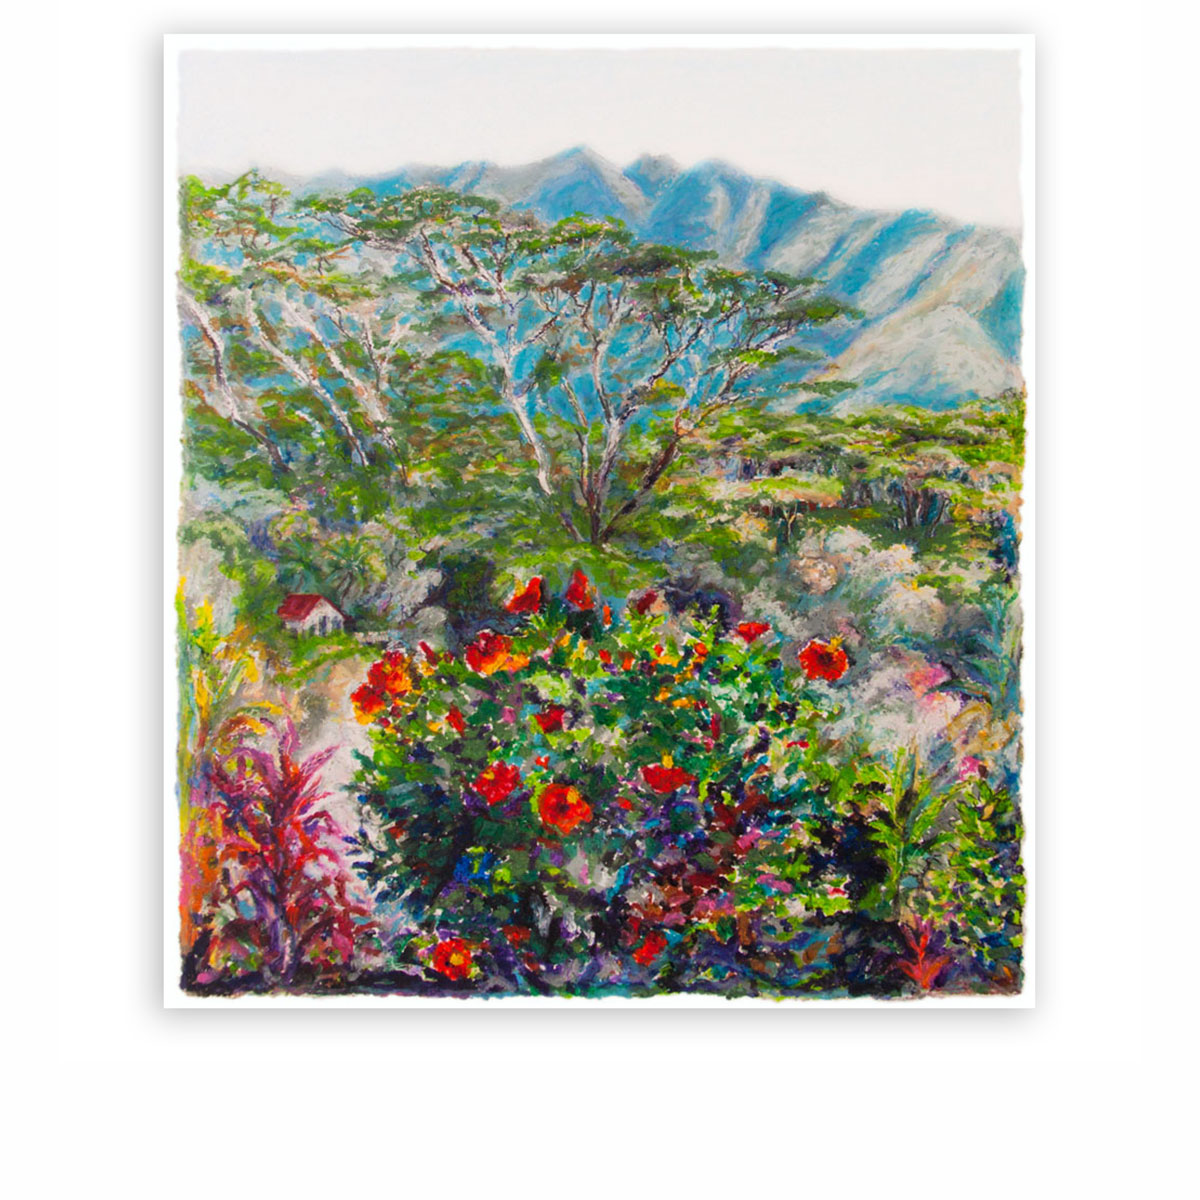 Hibiscus-in-Manoa-Valley, Michael daly Artist, Oil pastel on paper